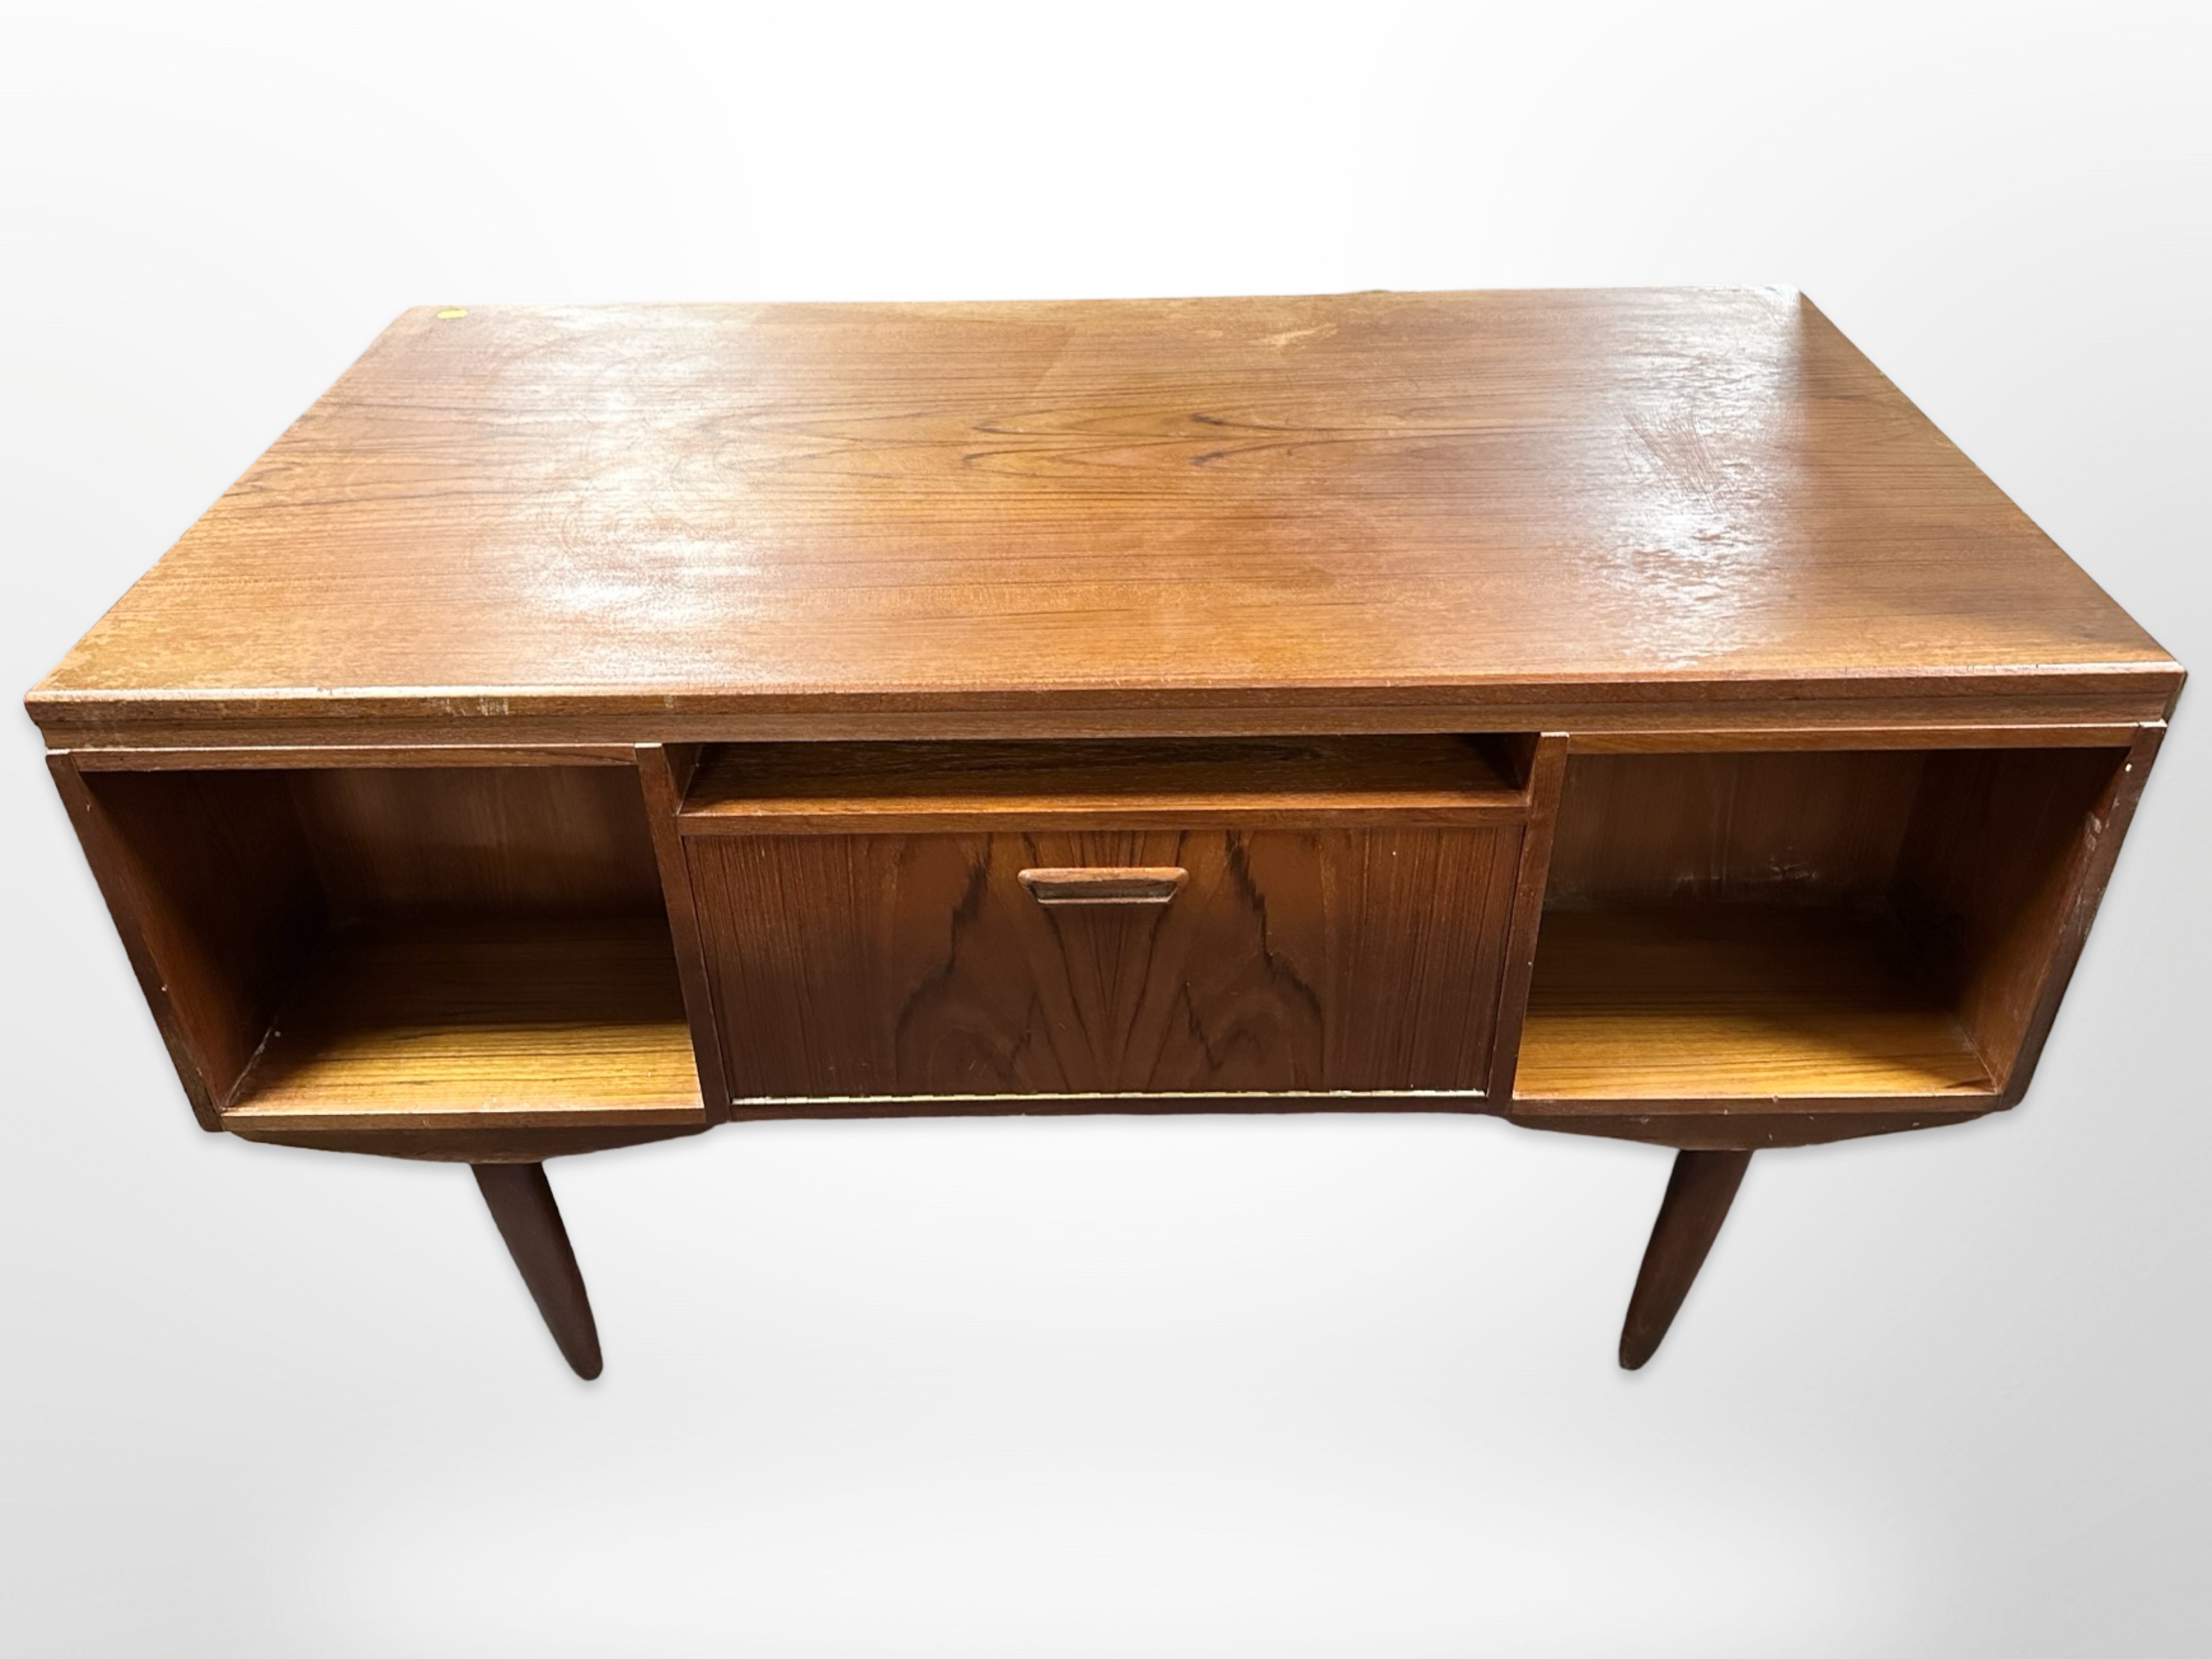 A 20th century Danish teak double sided twin-pedestal writing desk on tapered legs, - Image 2 of 2